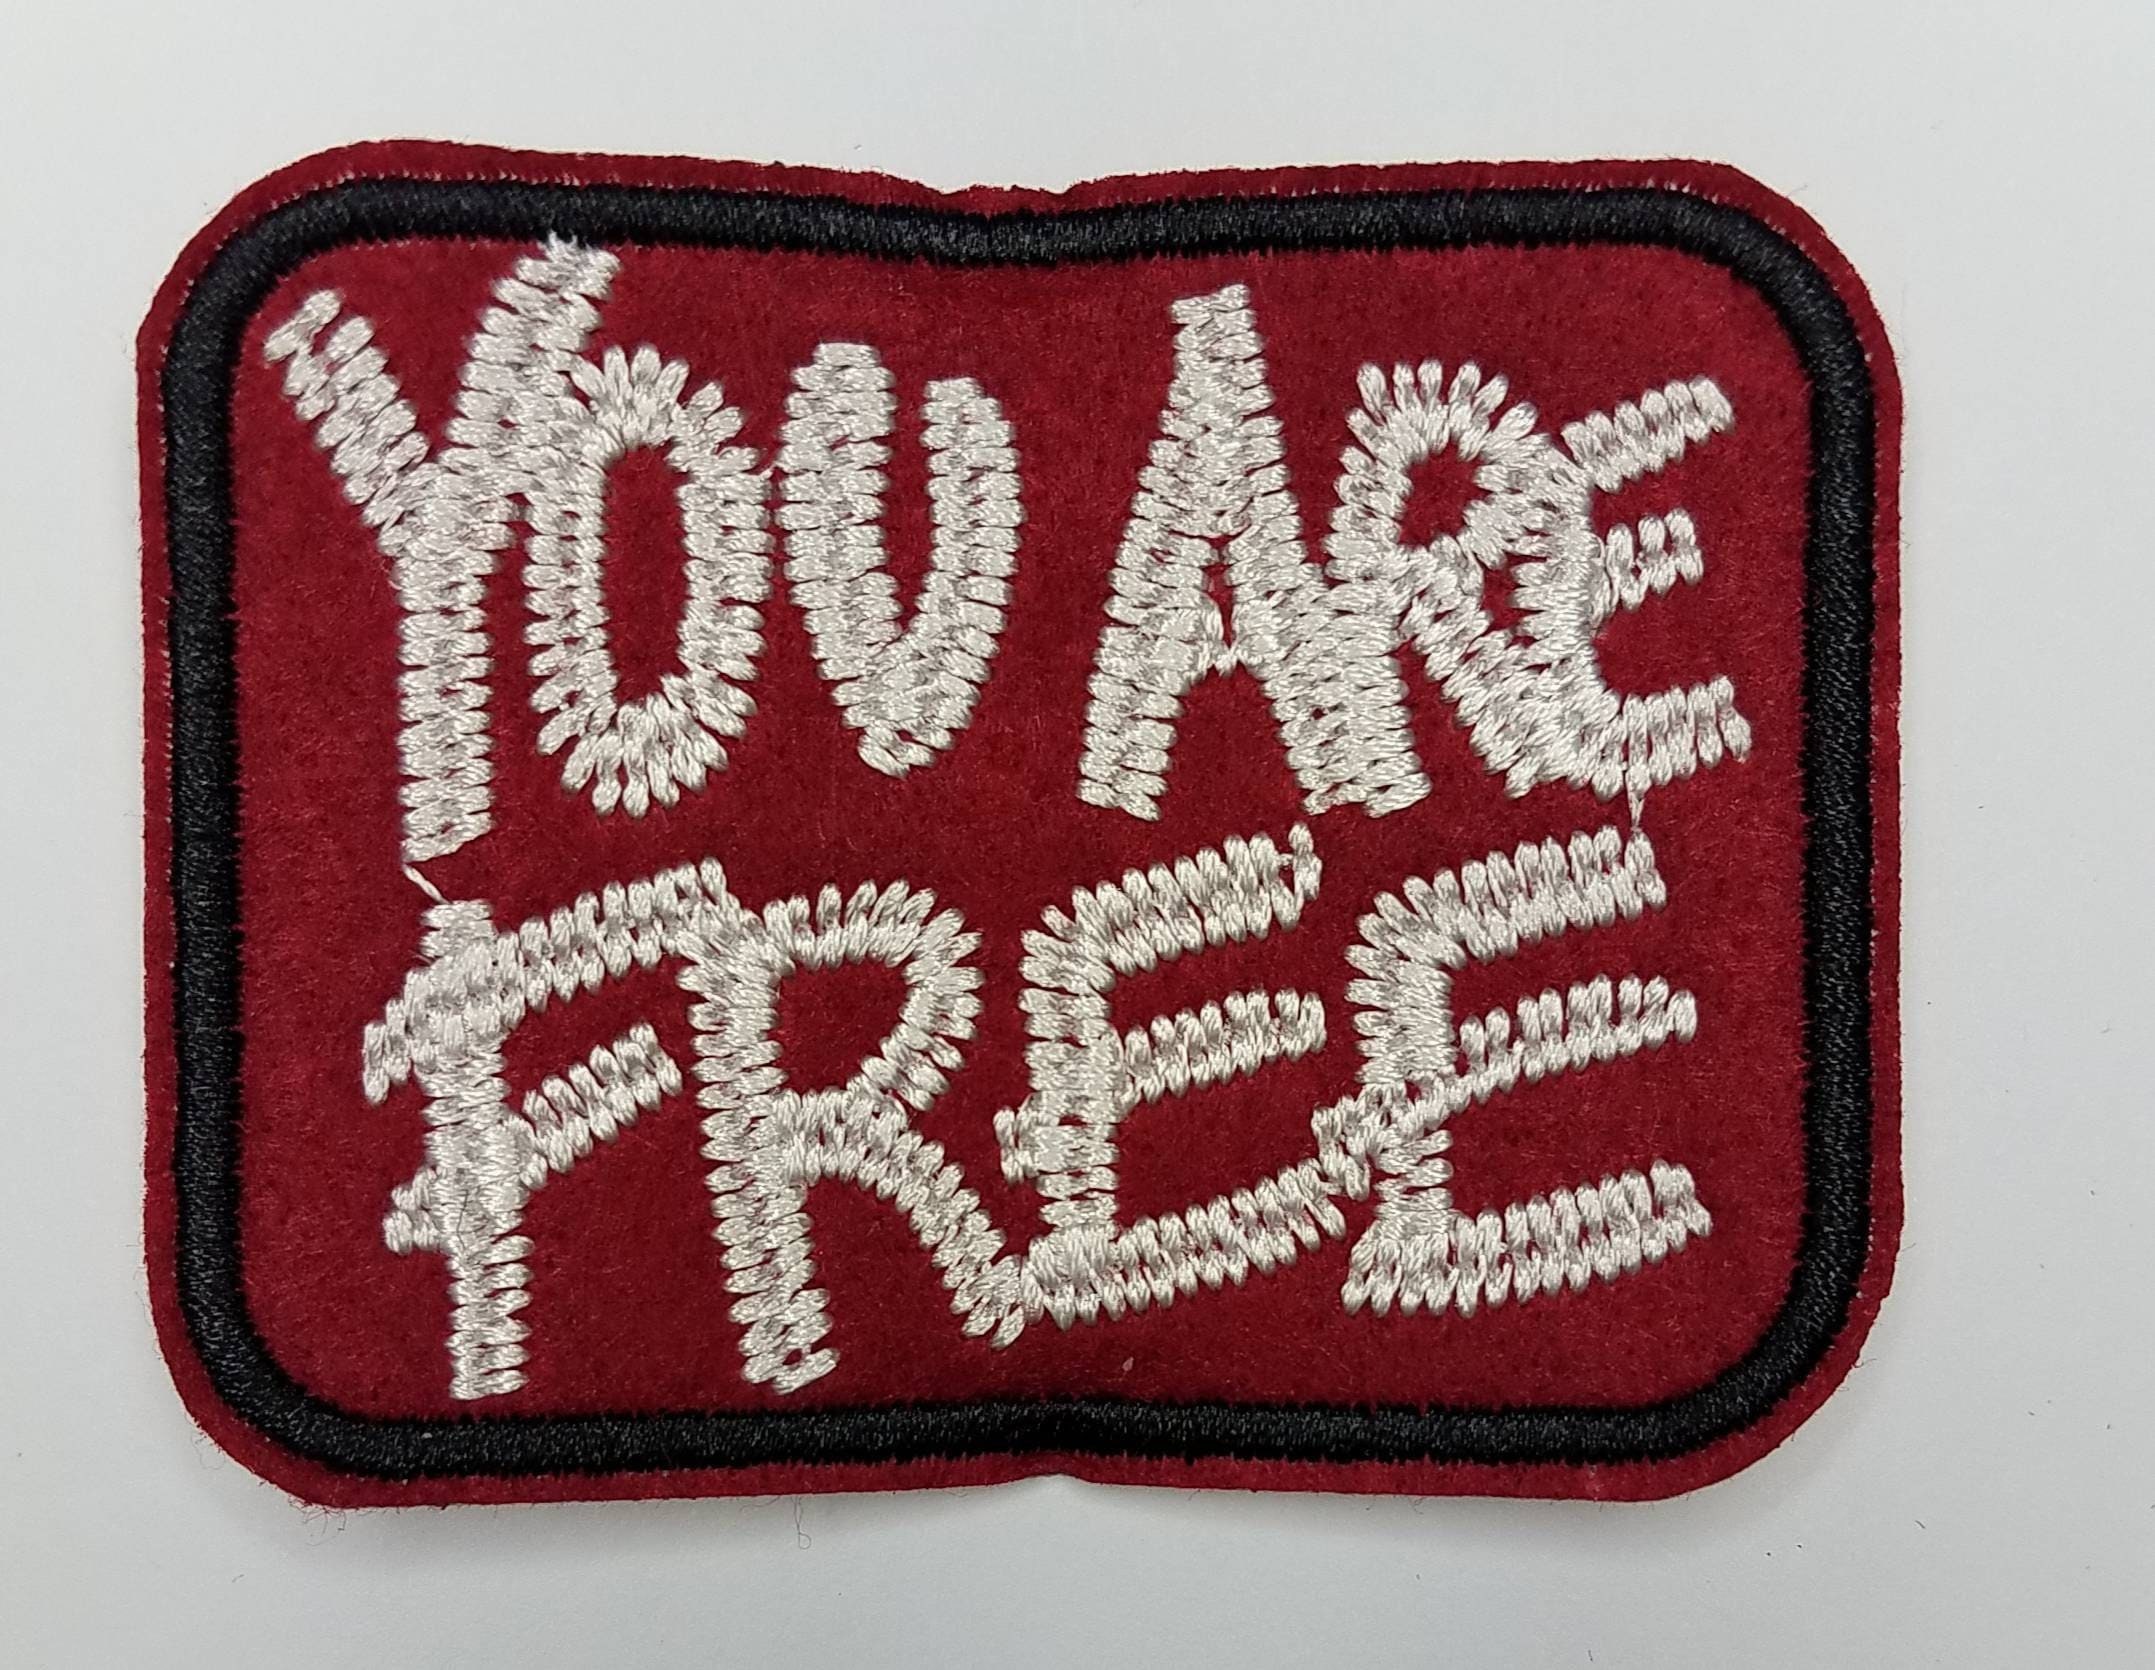 Funny You Read My Patch Embroidered Hook and Loop Morale Patch FREE USA  SHIPPING